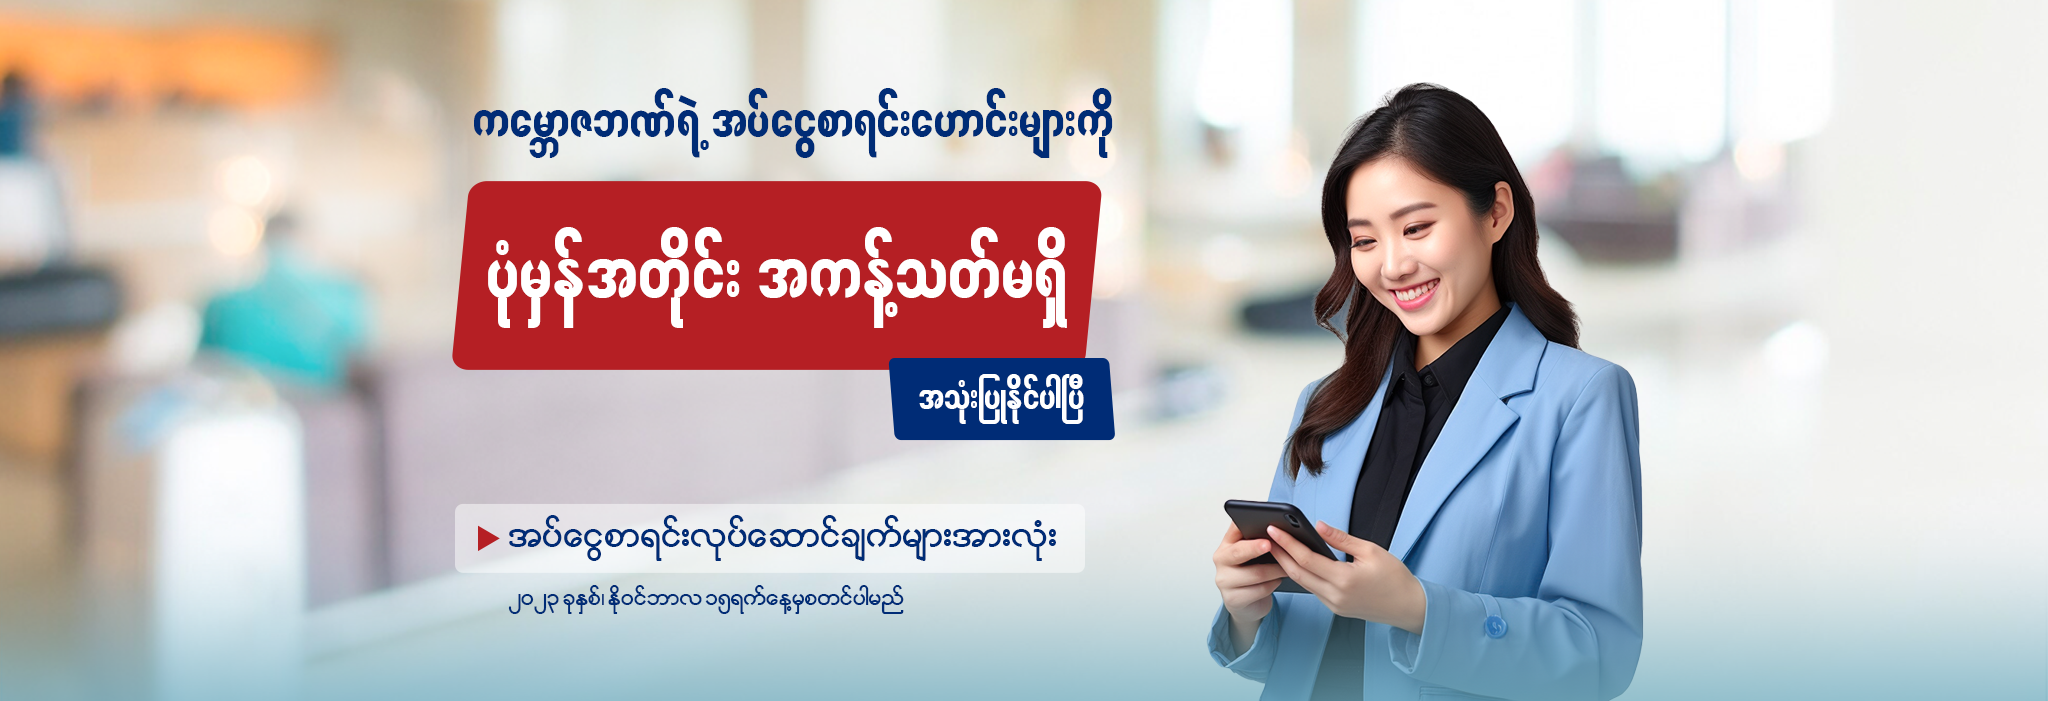 KBZ Bank Normal Accounts can be used without restriction